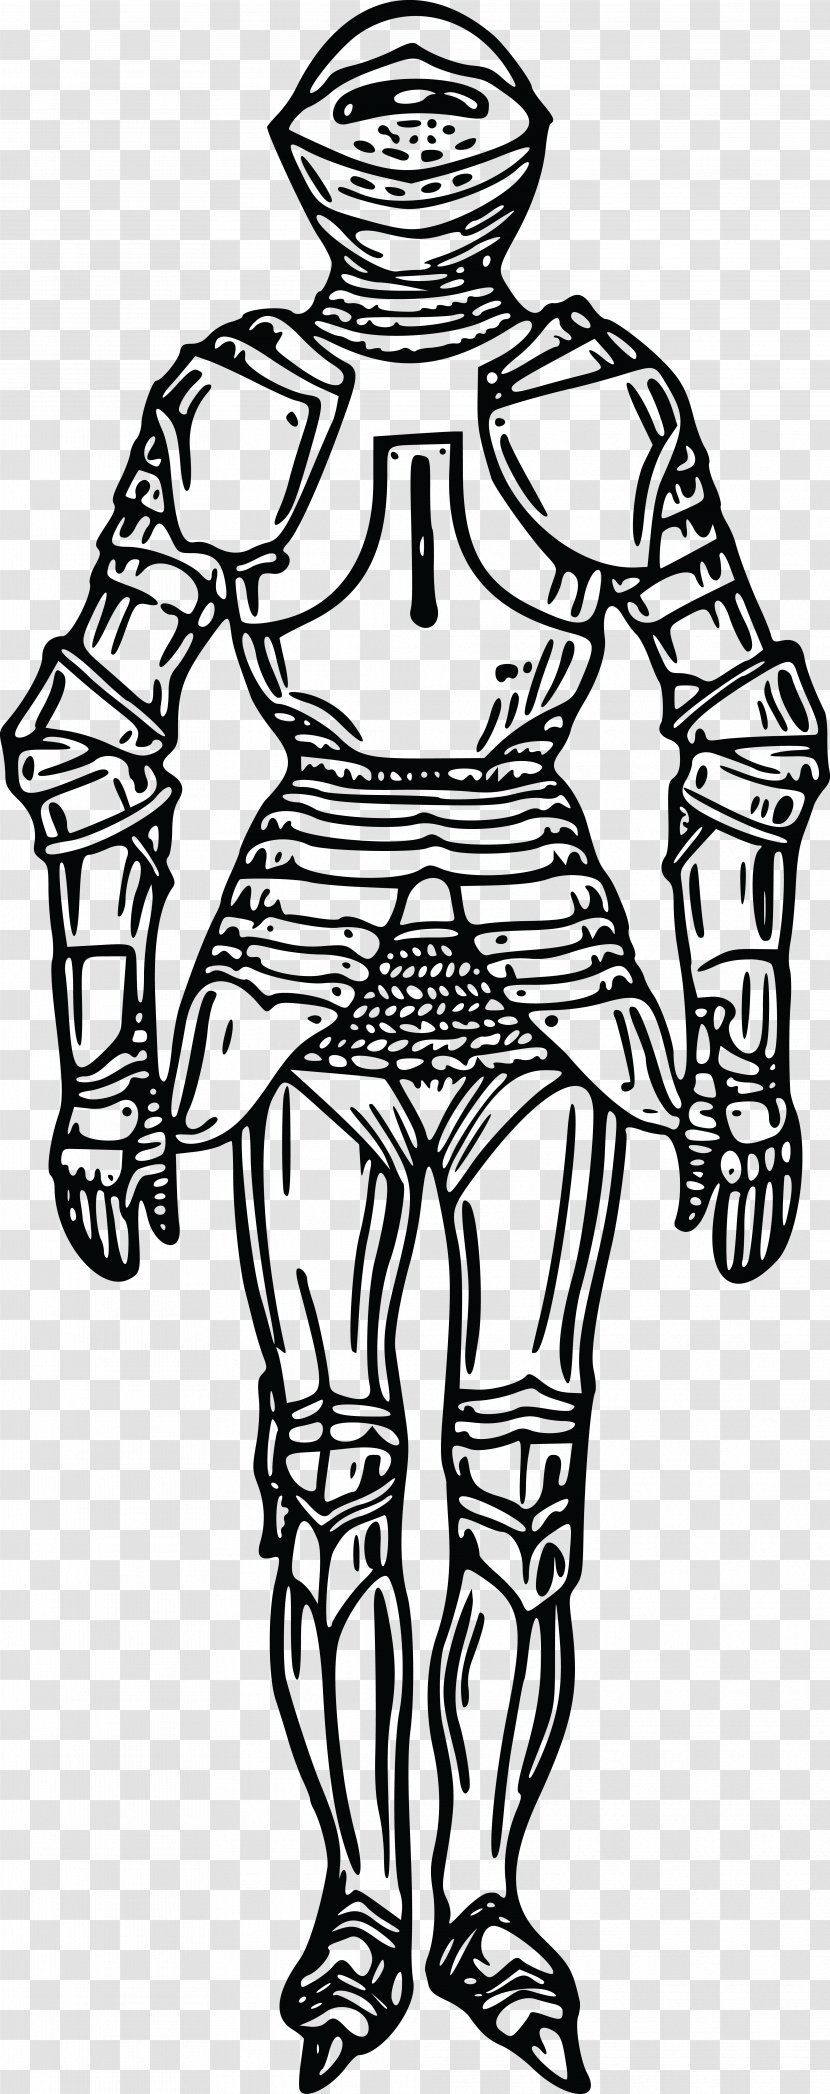 Plate Armour Body Armor Drawing Clip Art - Knight - Belfry Transparent PNG